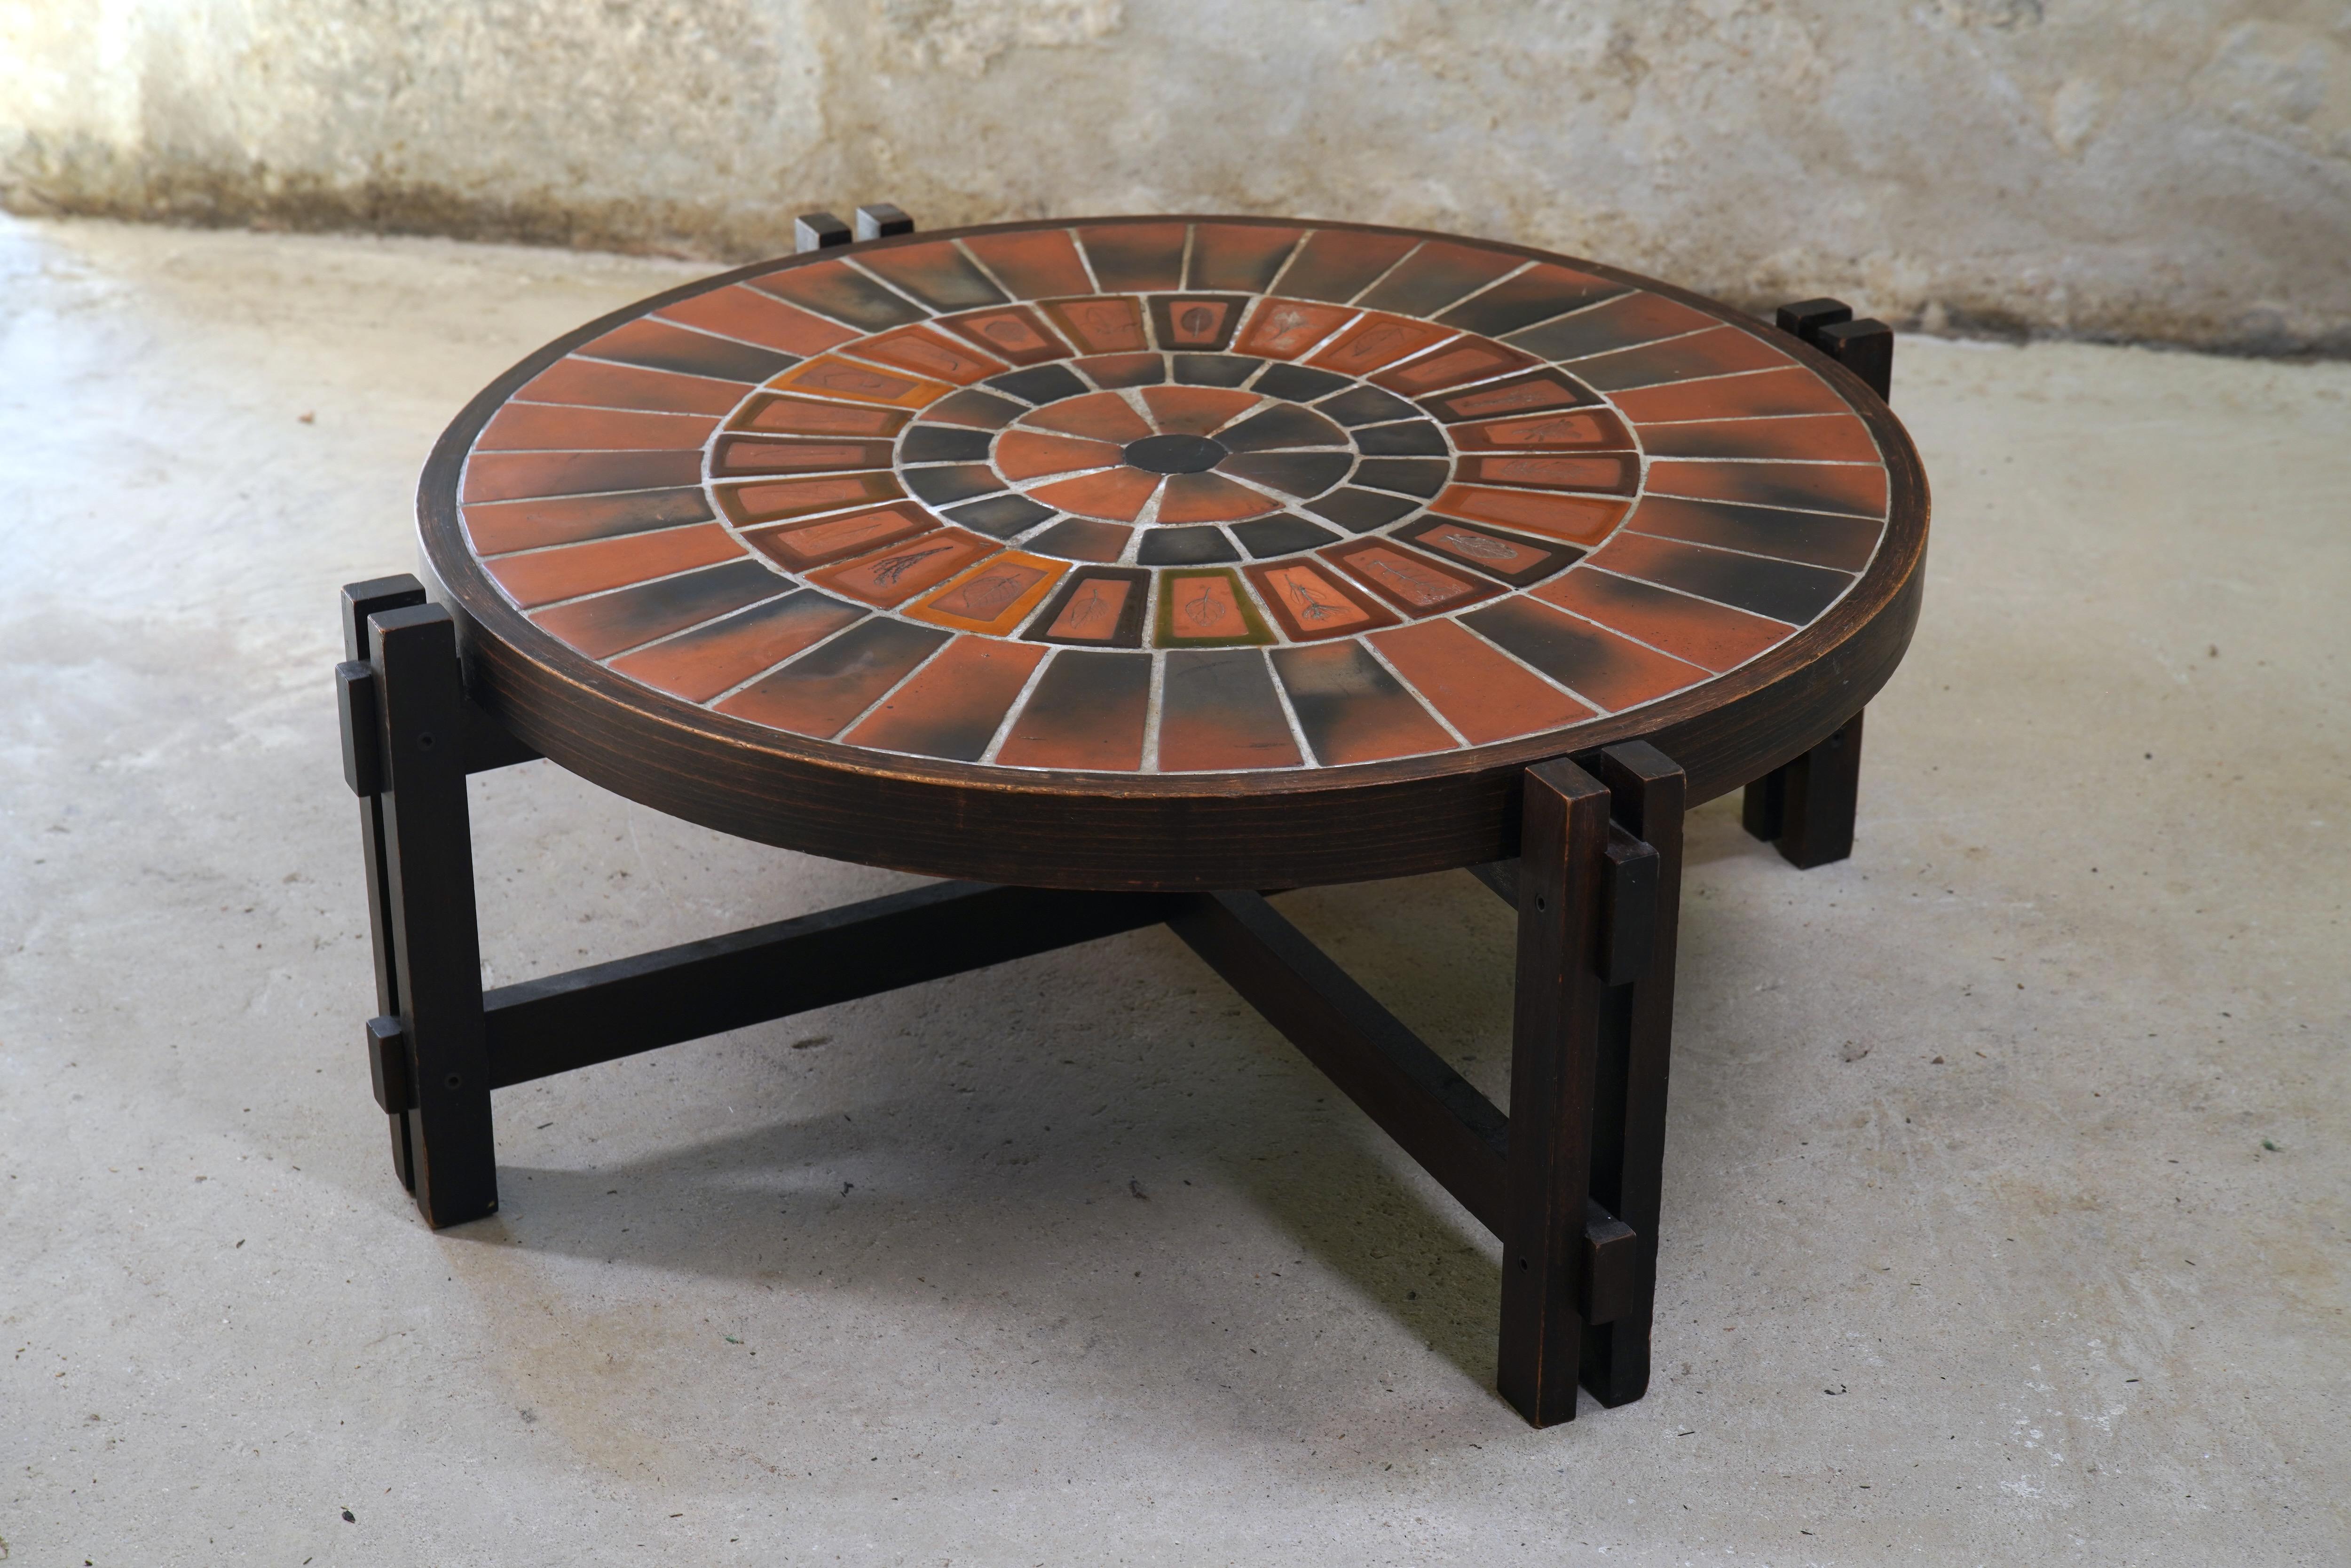 Mid-Century Modern Roger Capron Round Coffee Table with Garrigue Tiles, France 1960s